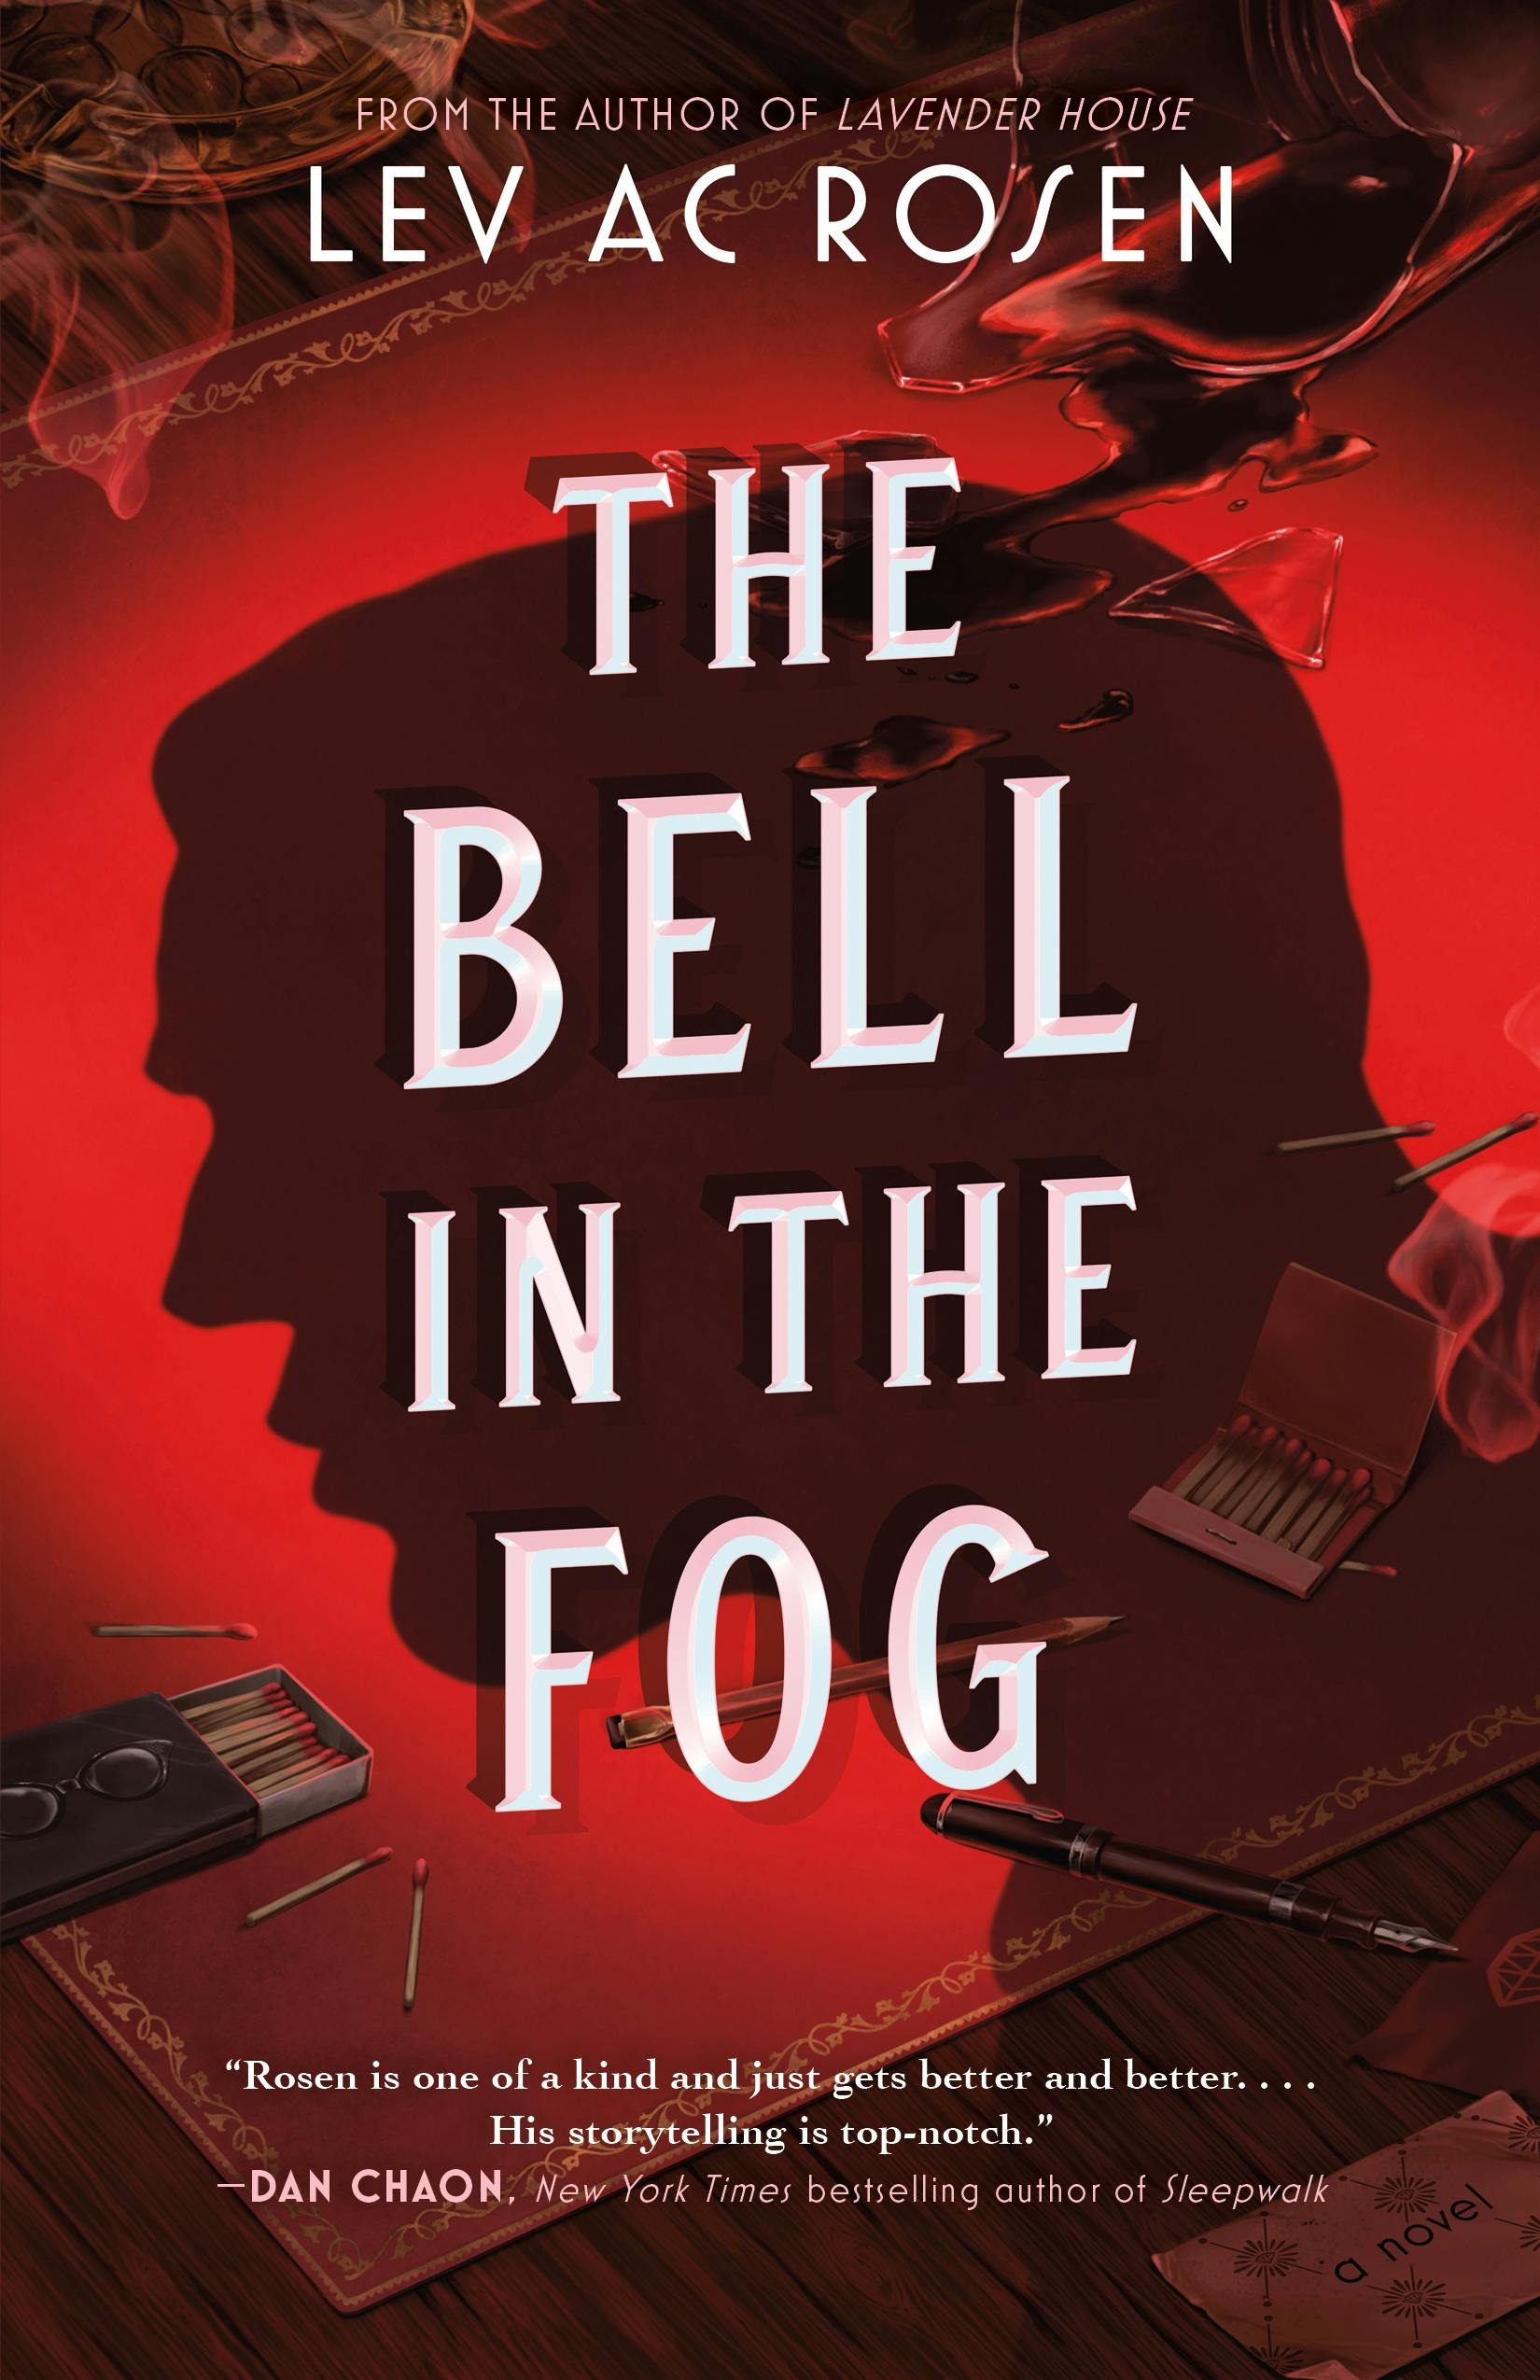 Cover for the book titled as: The Bell in the Fog